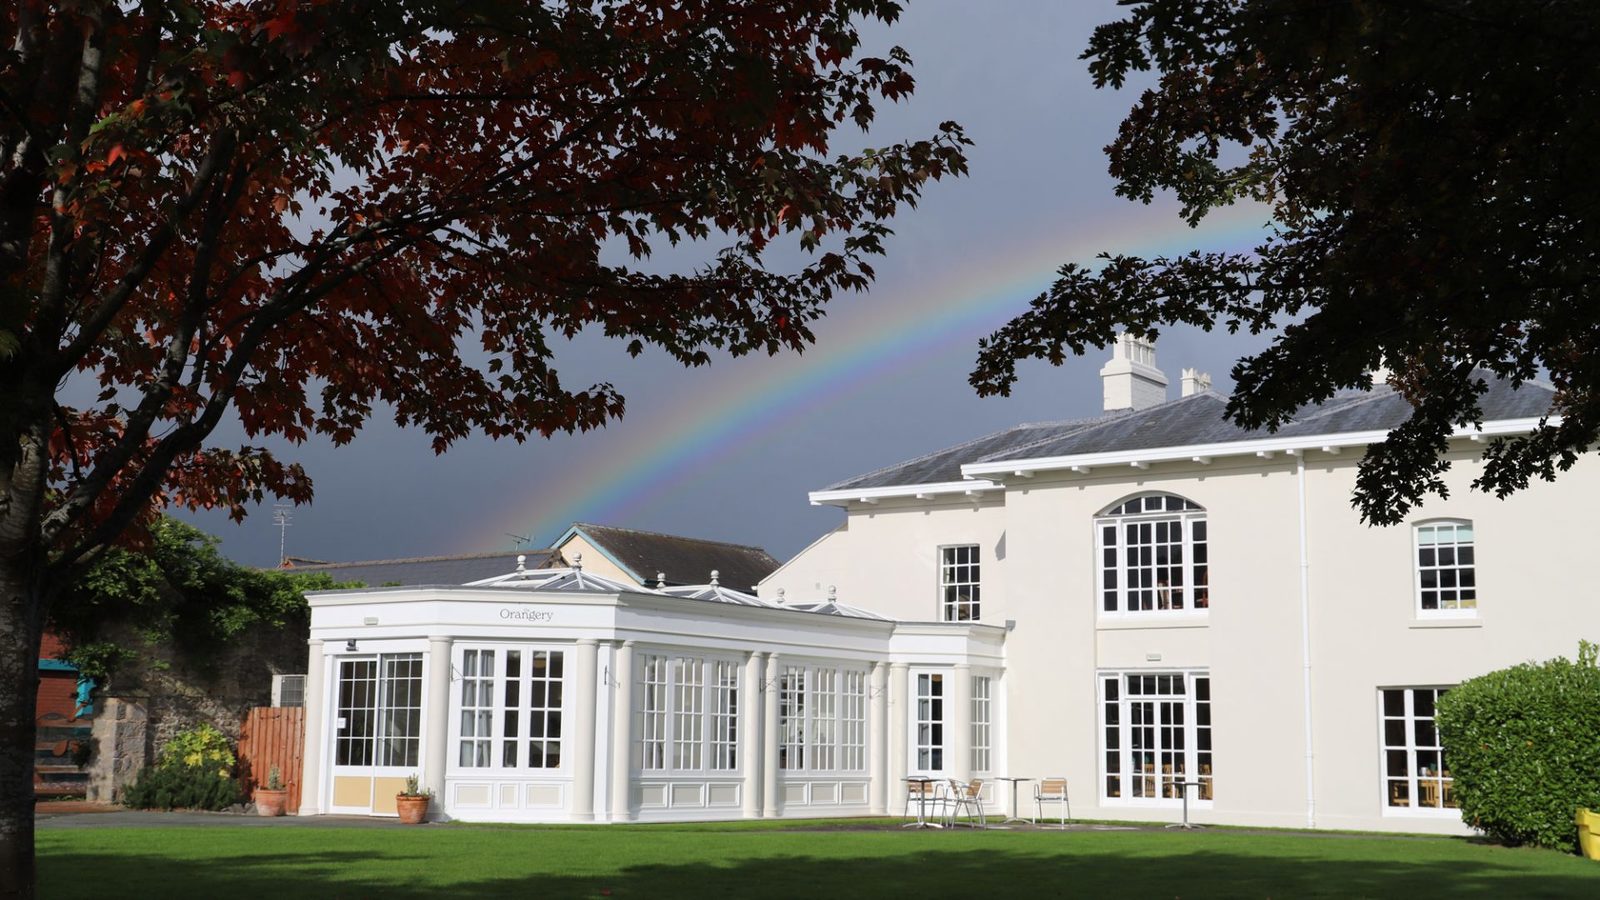 Orangery with a rainbow in the sky behind it - October 2022